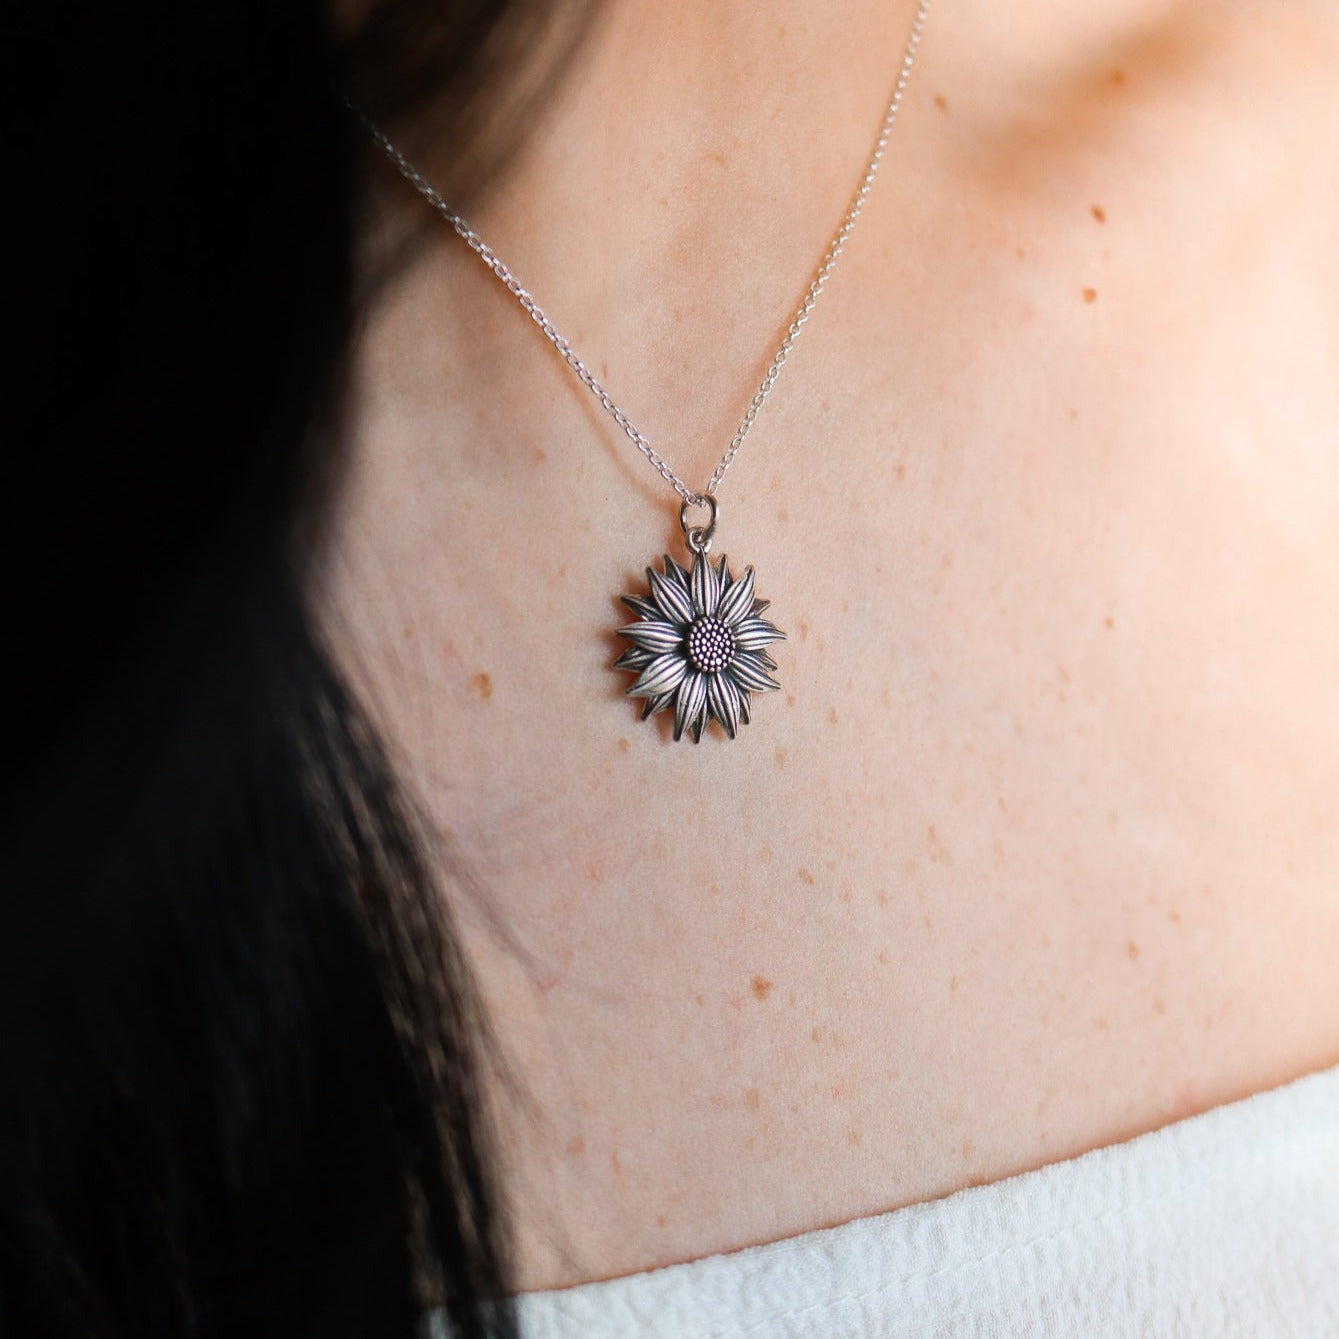 James Avery Artisan Jewelry - The Wild Sunflower Pendant in bronze and sterling  silver pairs perfectly with this changeable necklace and a turquoise bead.  https://bit.ly/3urNUId 📷: darlenemariedavila | Facebook